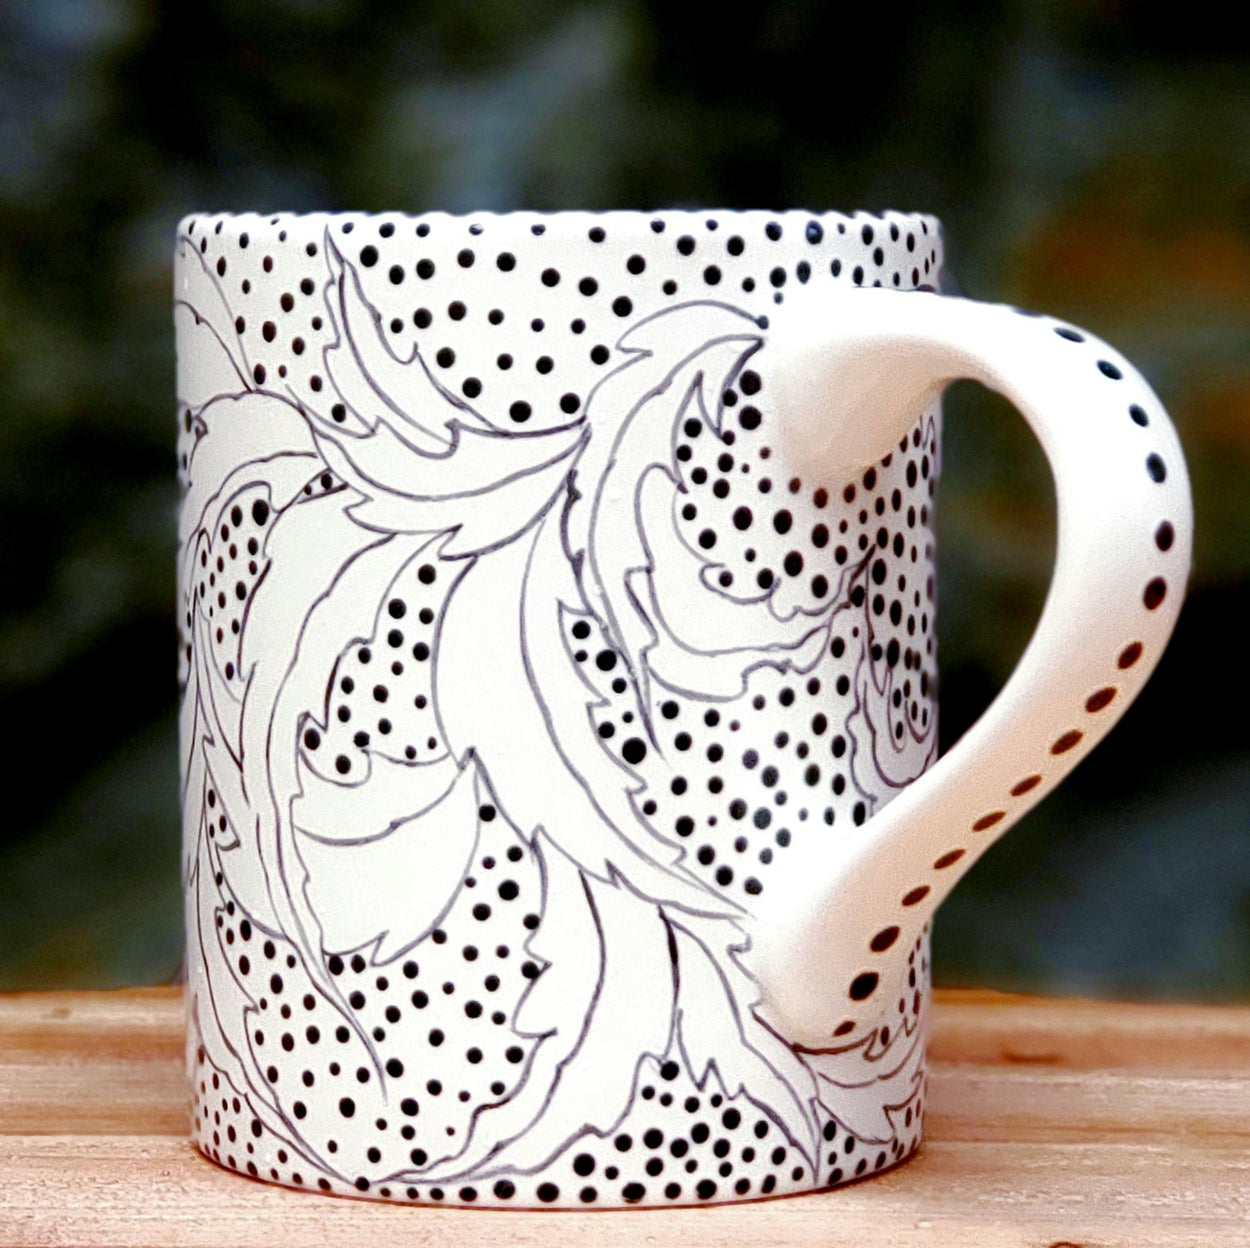 16 oz. kiln fired ceramic mug ... black and white hand painted in a beautiful botanical all over design.